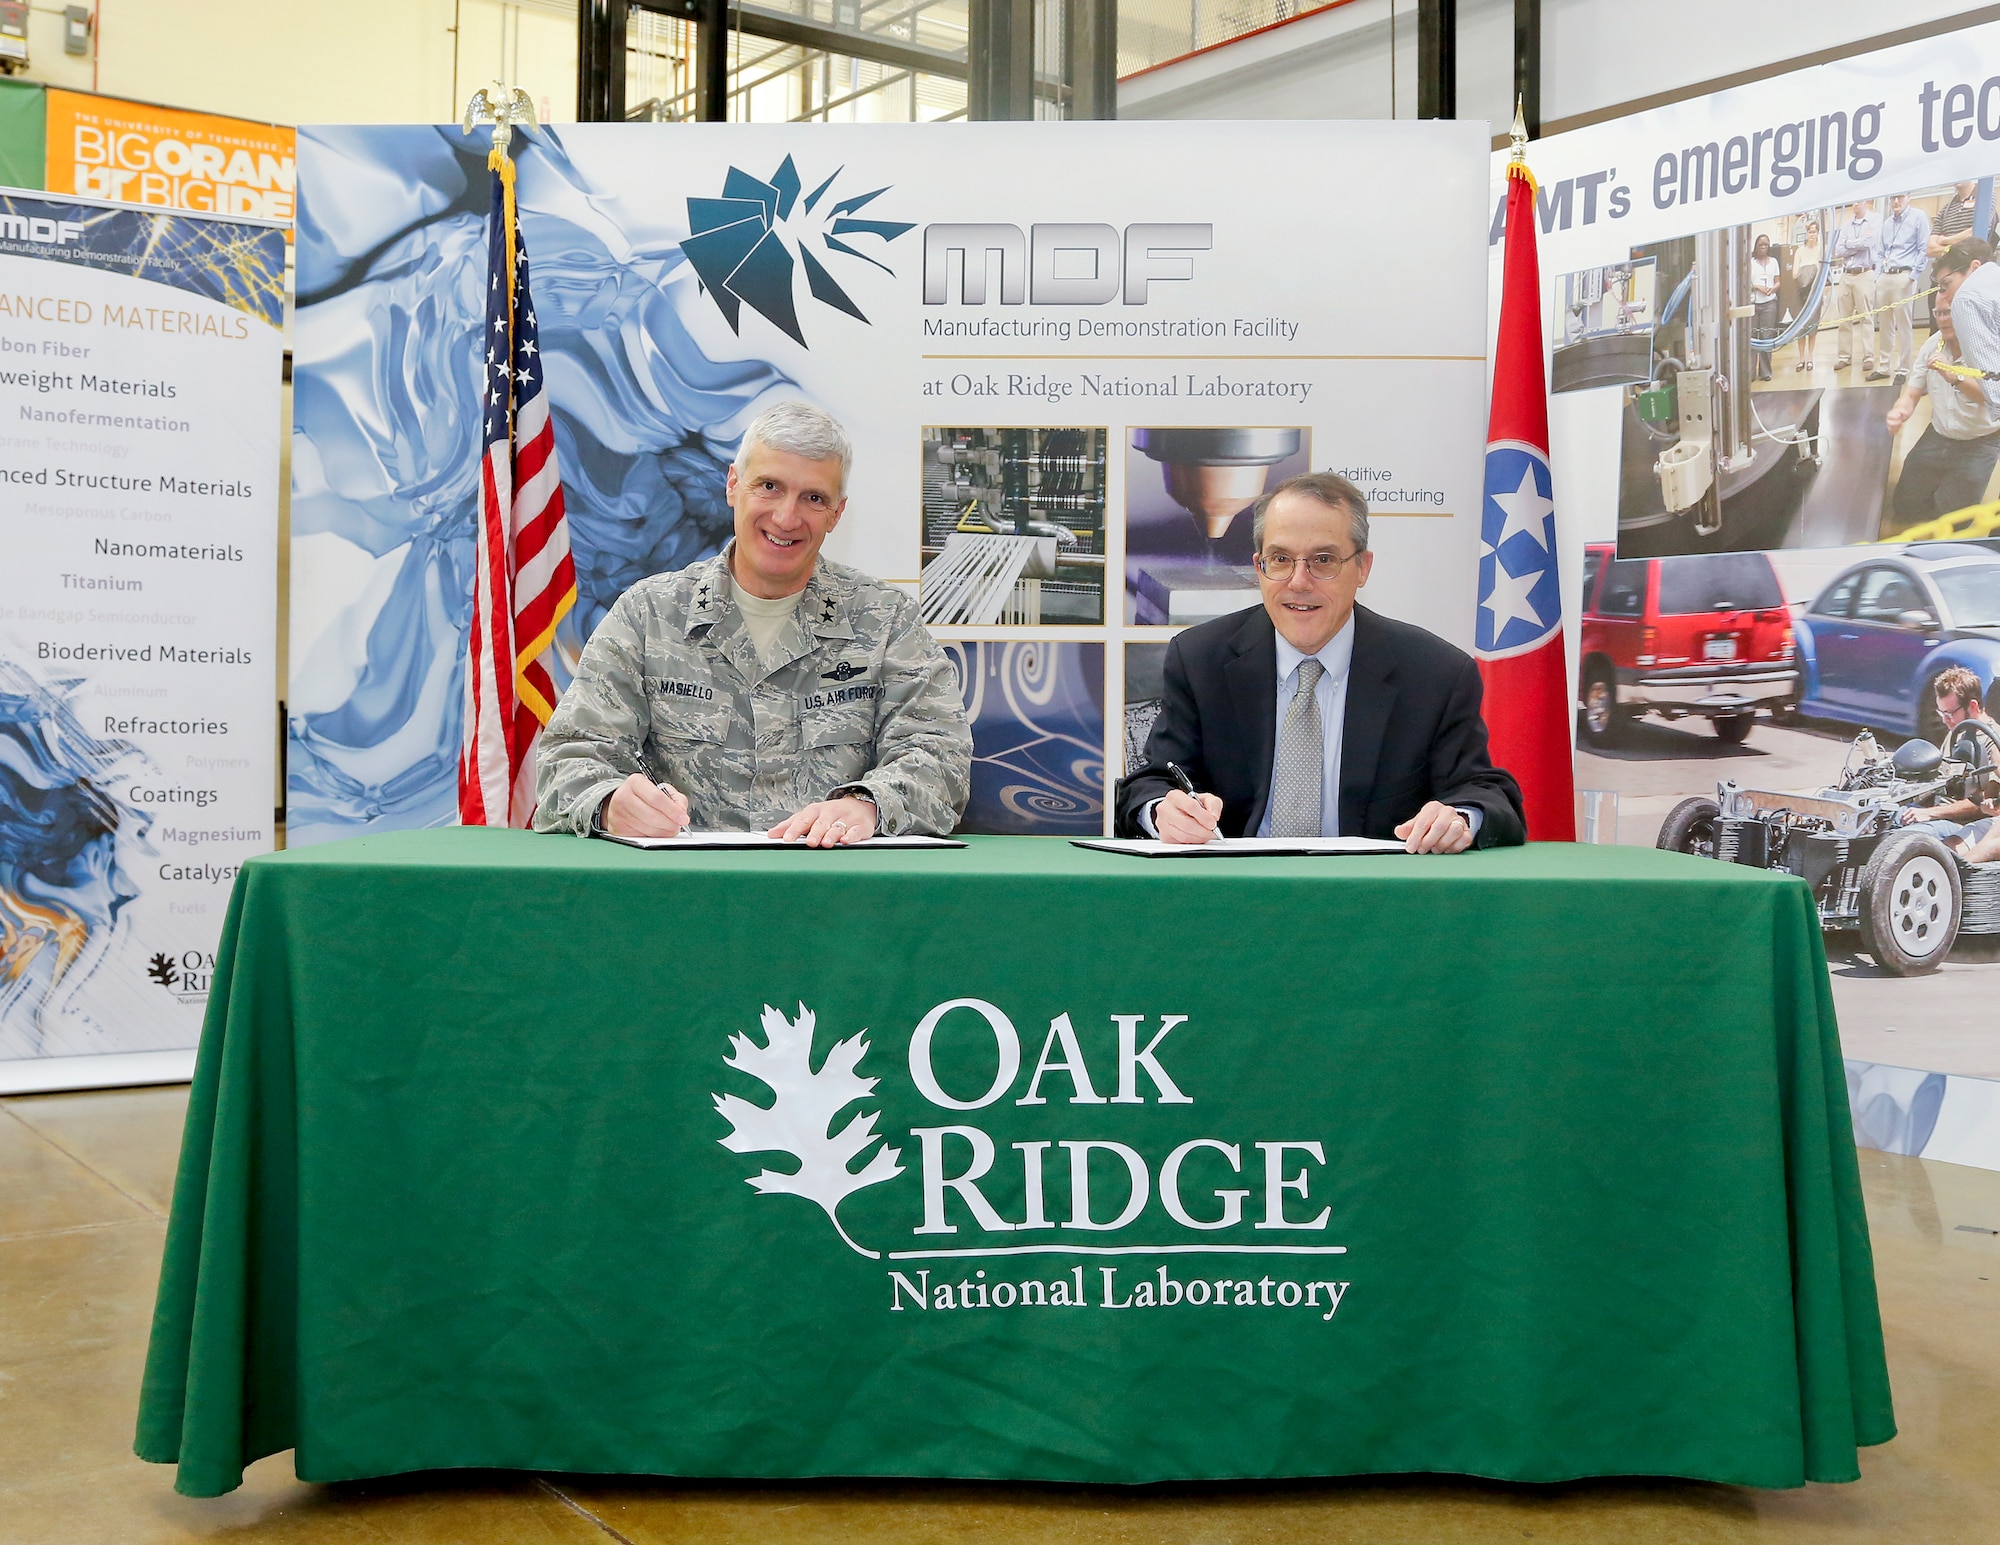 Maj. Gen. Tom Masiello, Air Force Research Laboratory commander, and Dr. Jim Roberto, Department of Energy Oak Ridge National Laboratory Associate Laboratory Director for Science and Technology Partnerships, sign a Memorandum of Understanding during an event Dec. 16 in Roane County, Tenn. The MOU between the labs intends to improve the cost, schedule and performance associated with developing critical technologies that will transition to armed forces units. (Oak Ridge National Laboratory photo by Jason Richards)